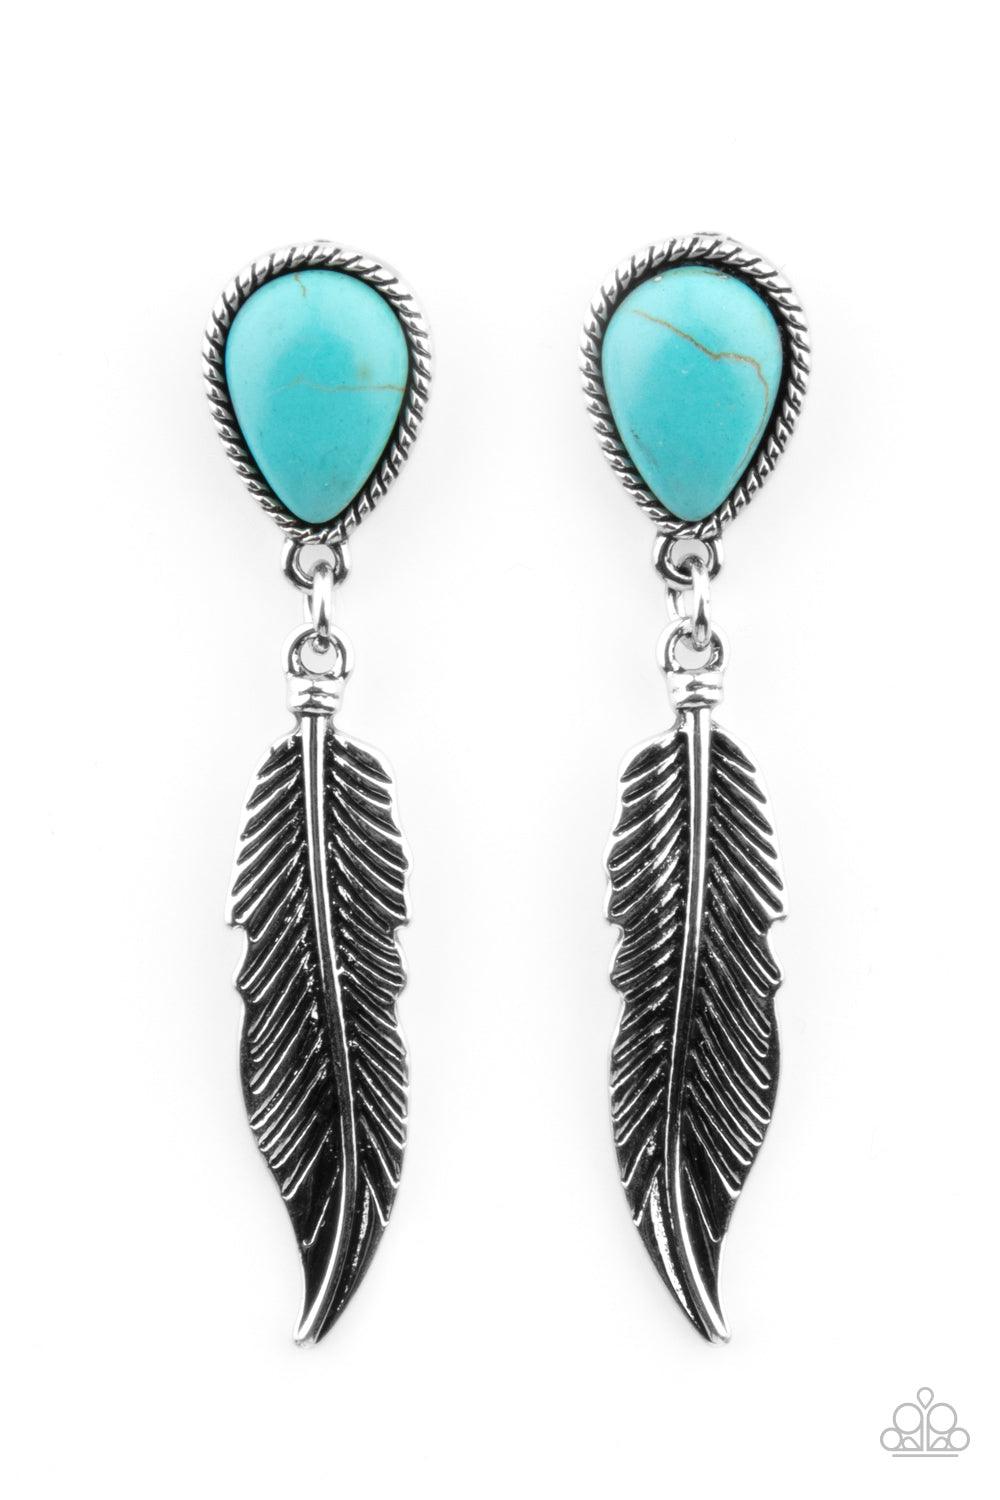 Paparazzi Accessories Totally Tran-QUILL - Blue A lifelike silver feather charm swings from the bottom of a teardrop turquoise stone teardrop, coalescing into a tranquil lure. Earring attaches to a standard post fitting. Sold as one pair of post earrings.